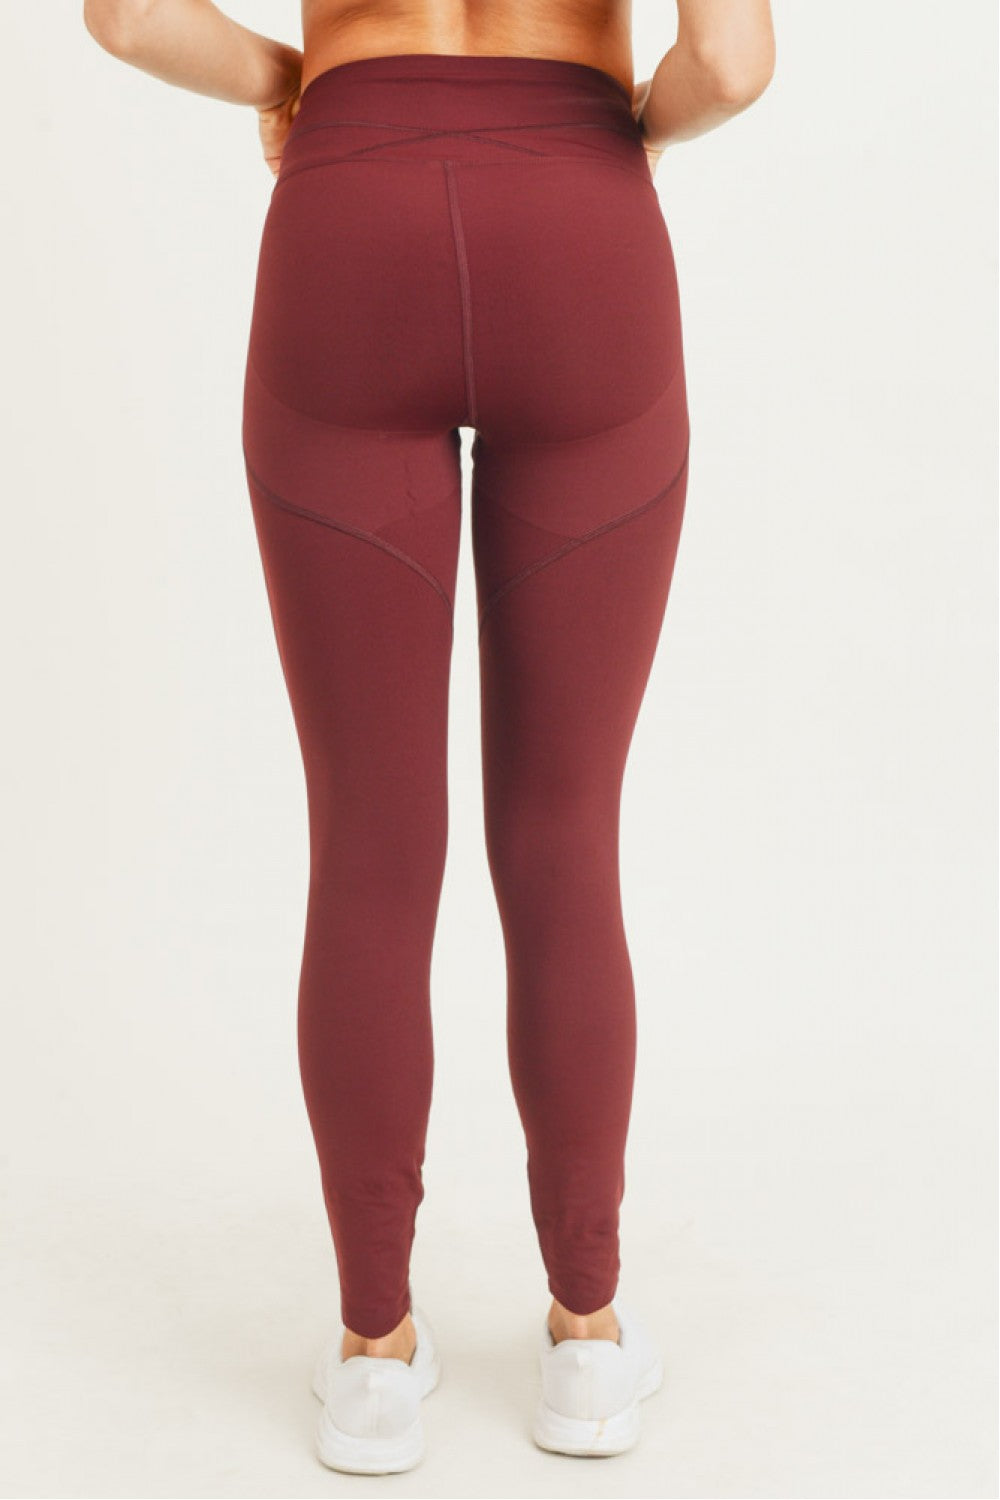 BOOTY POP HIGH-WAISTED LEGGINGS - APH6209 – The Sports Center